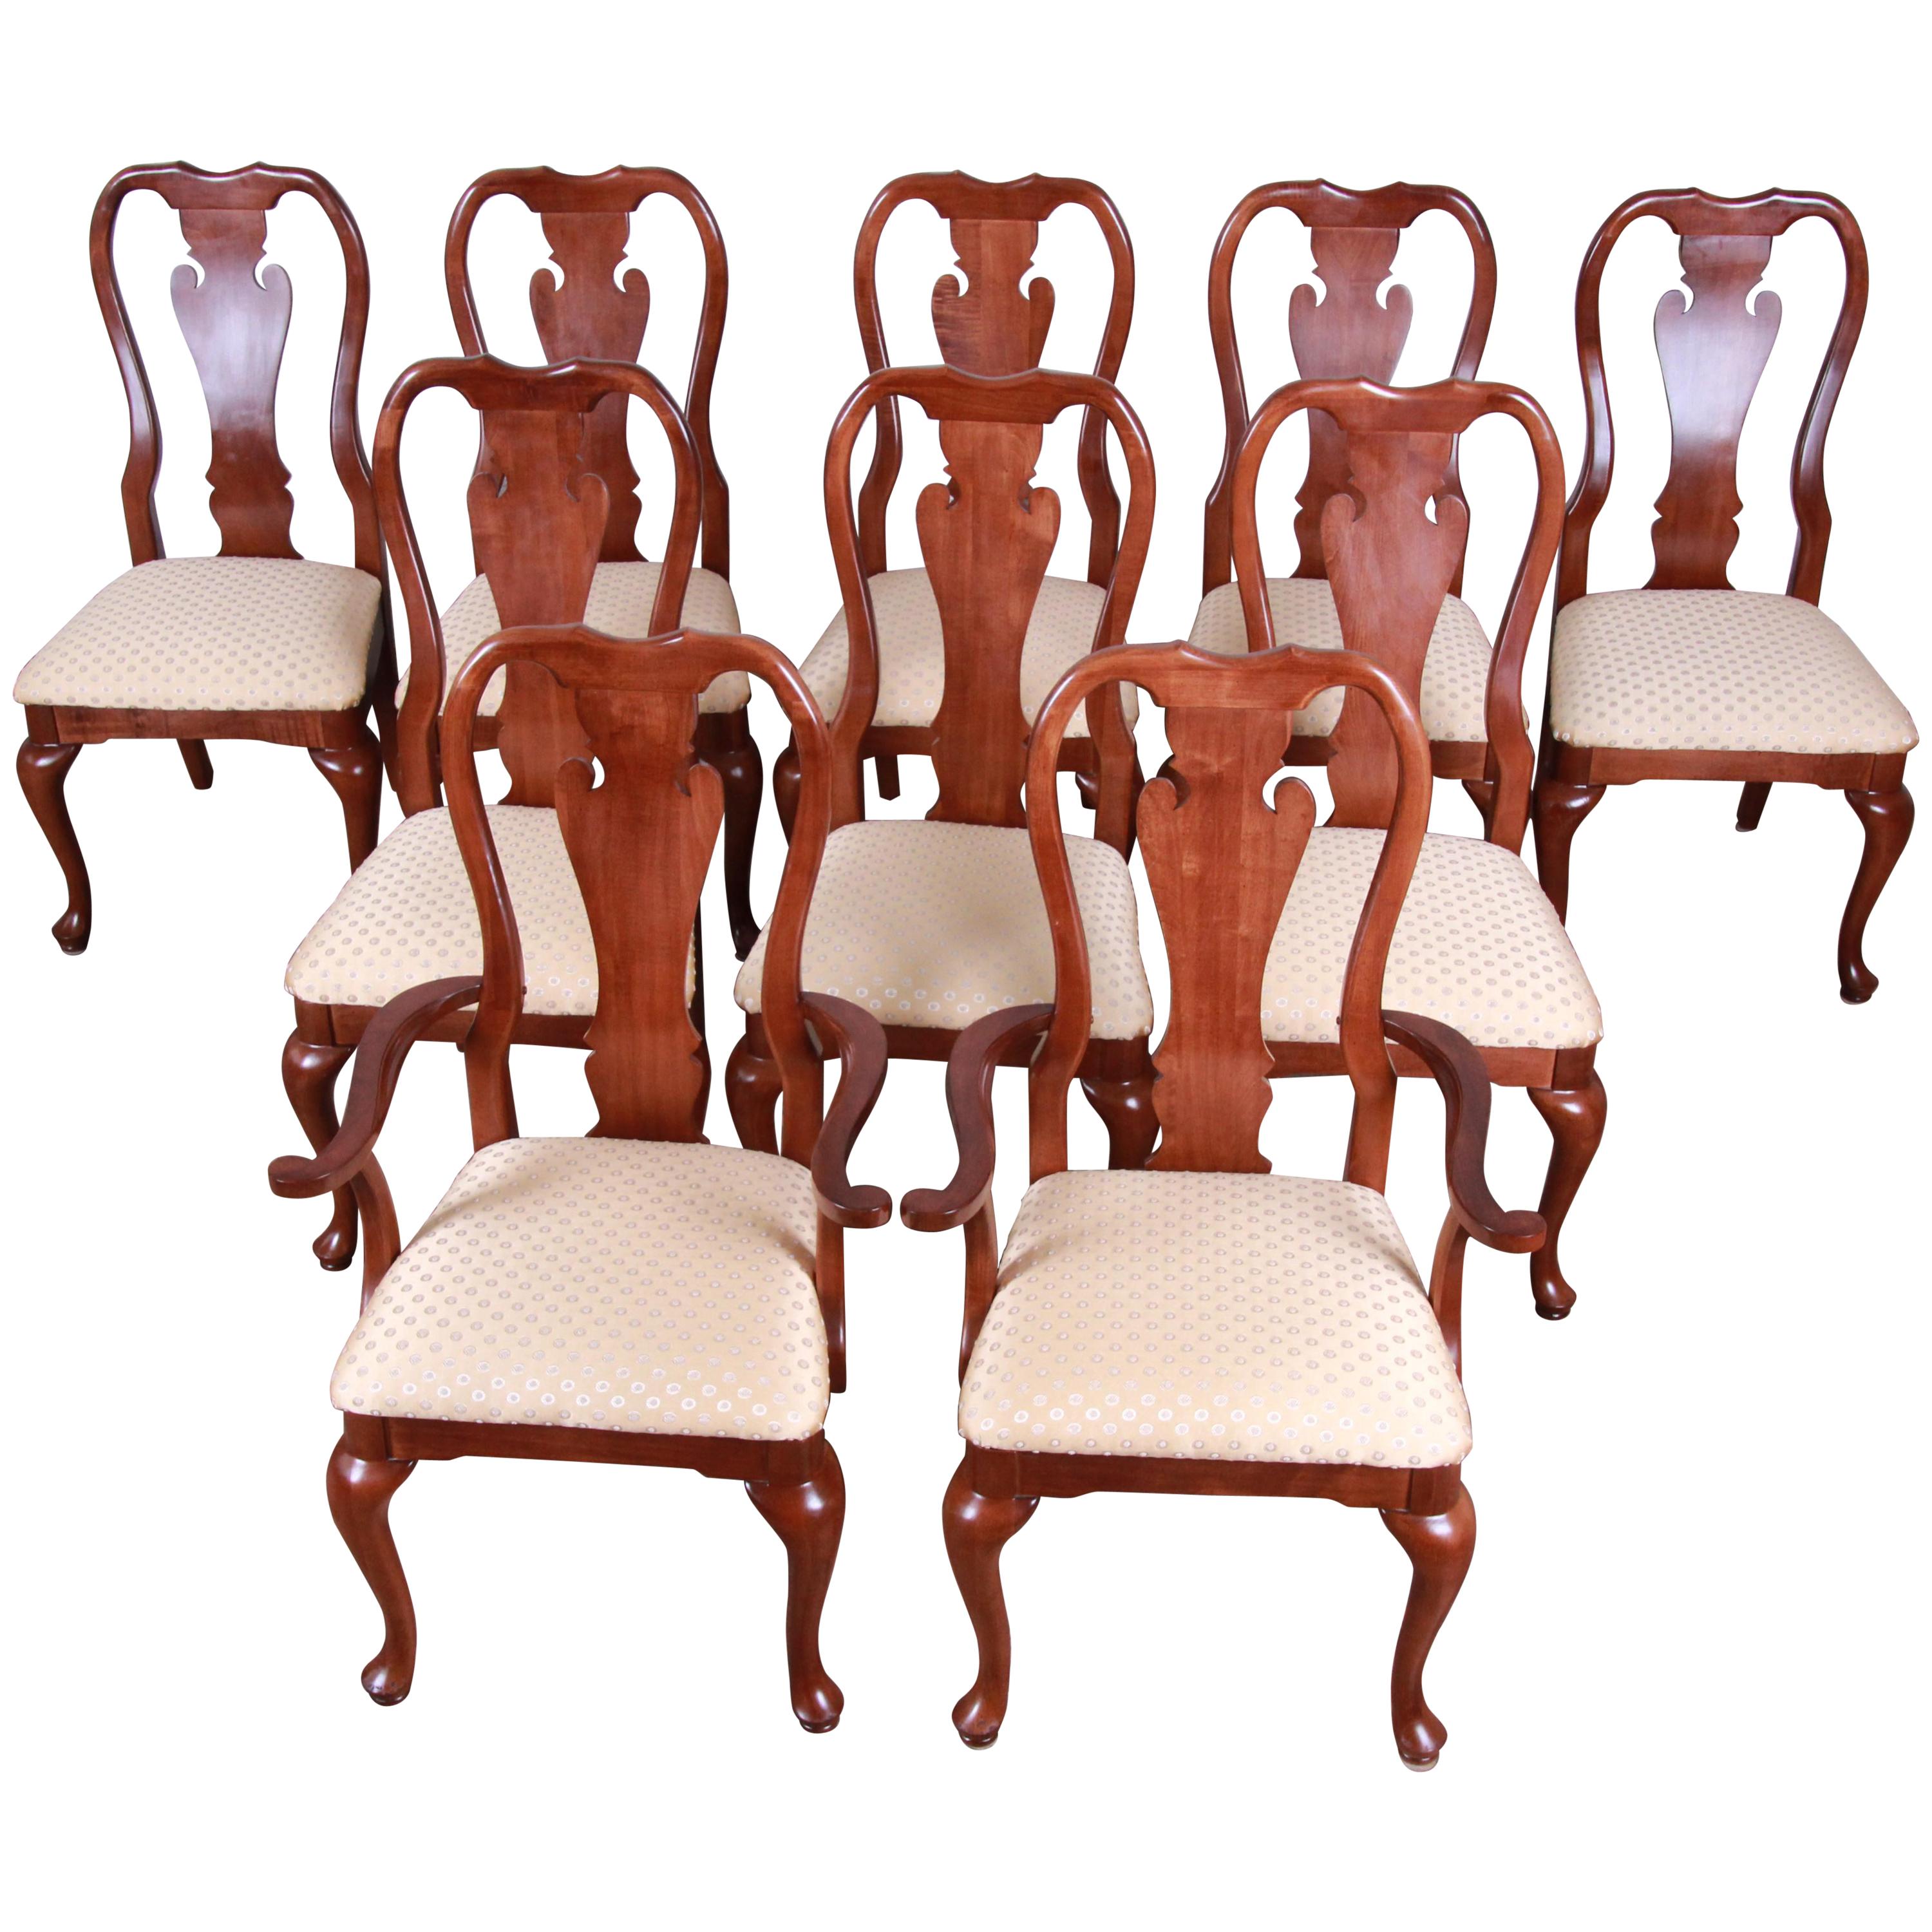 Solid Mahogany Queen Anne Style Dining Chairs, Set of 10